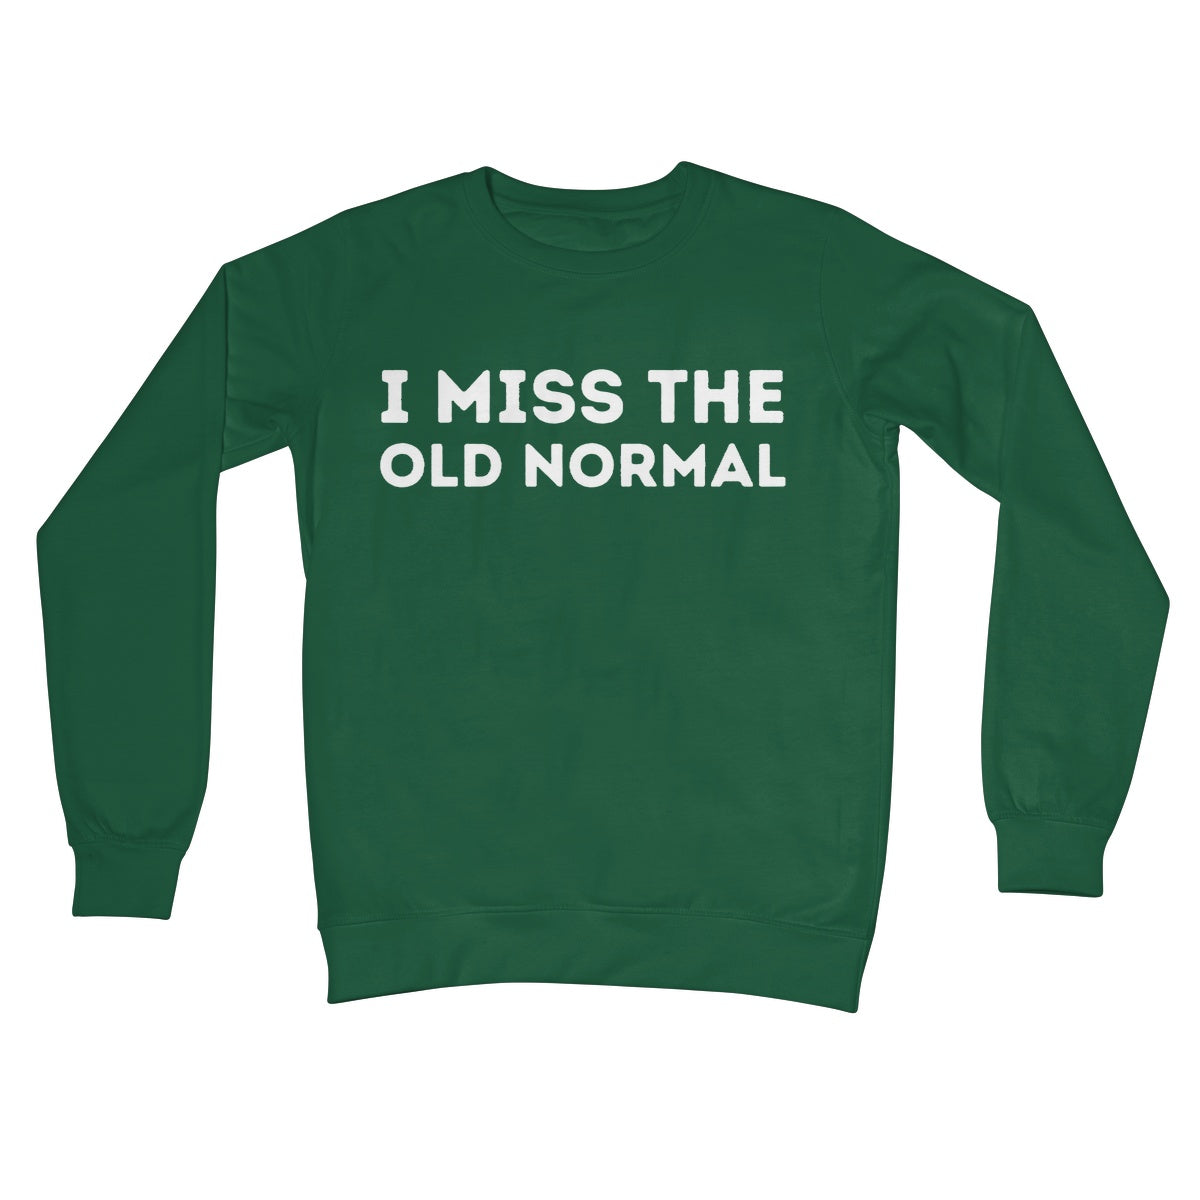 I miss the old normal jumper green